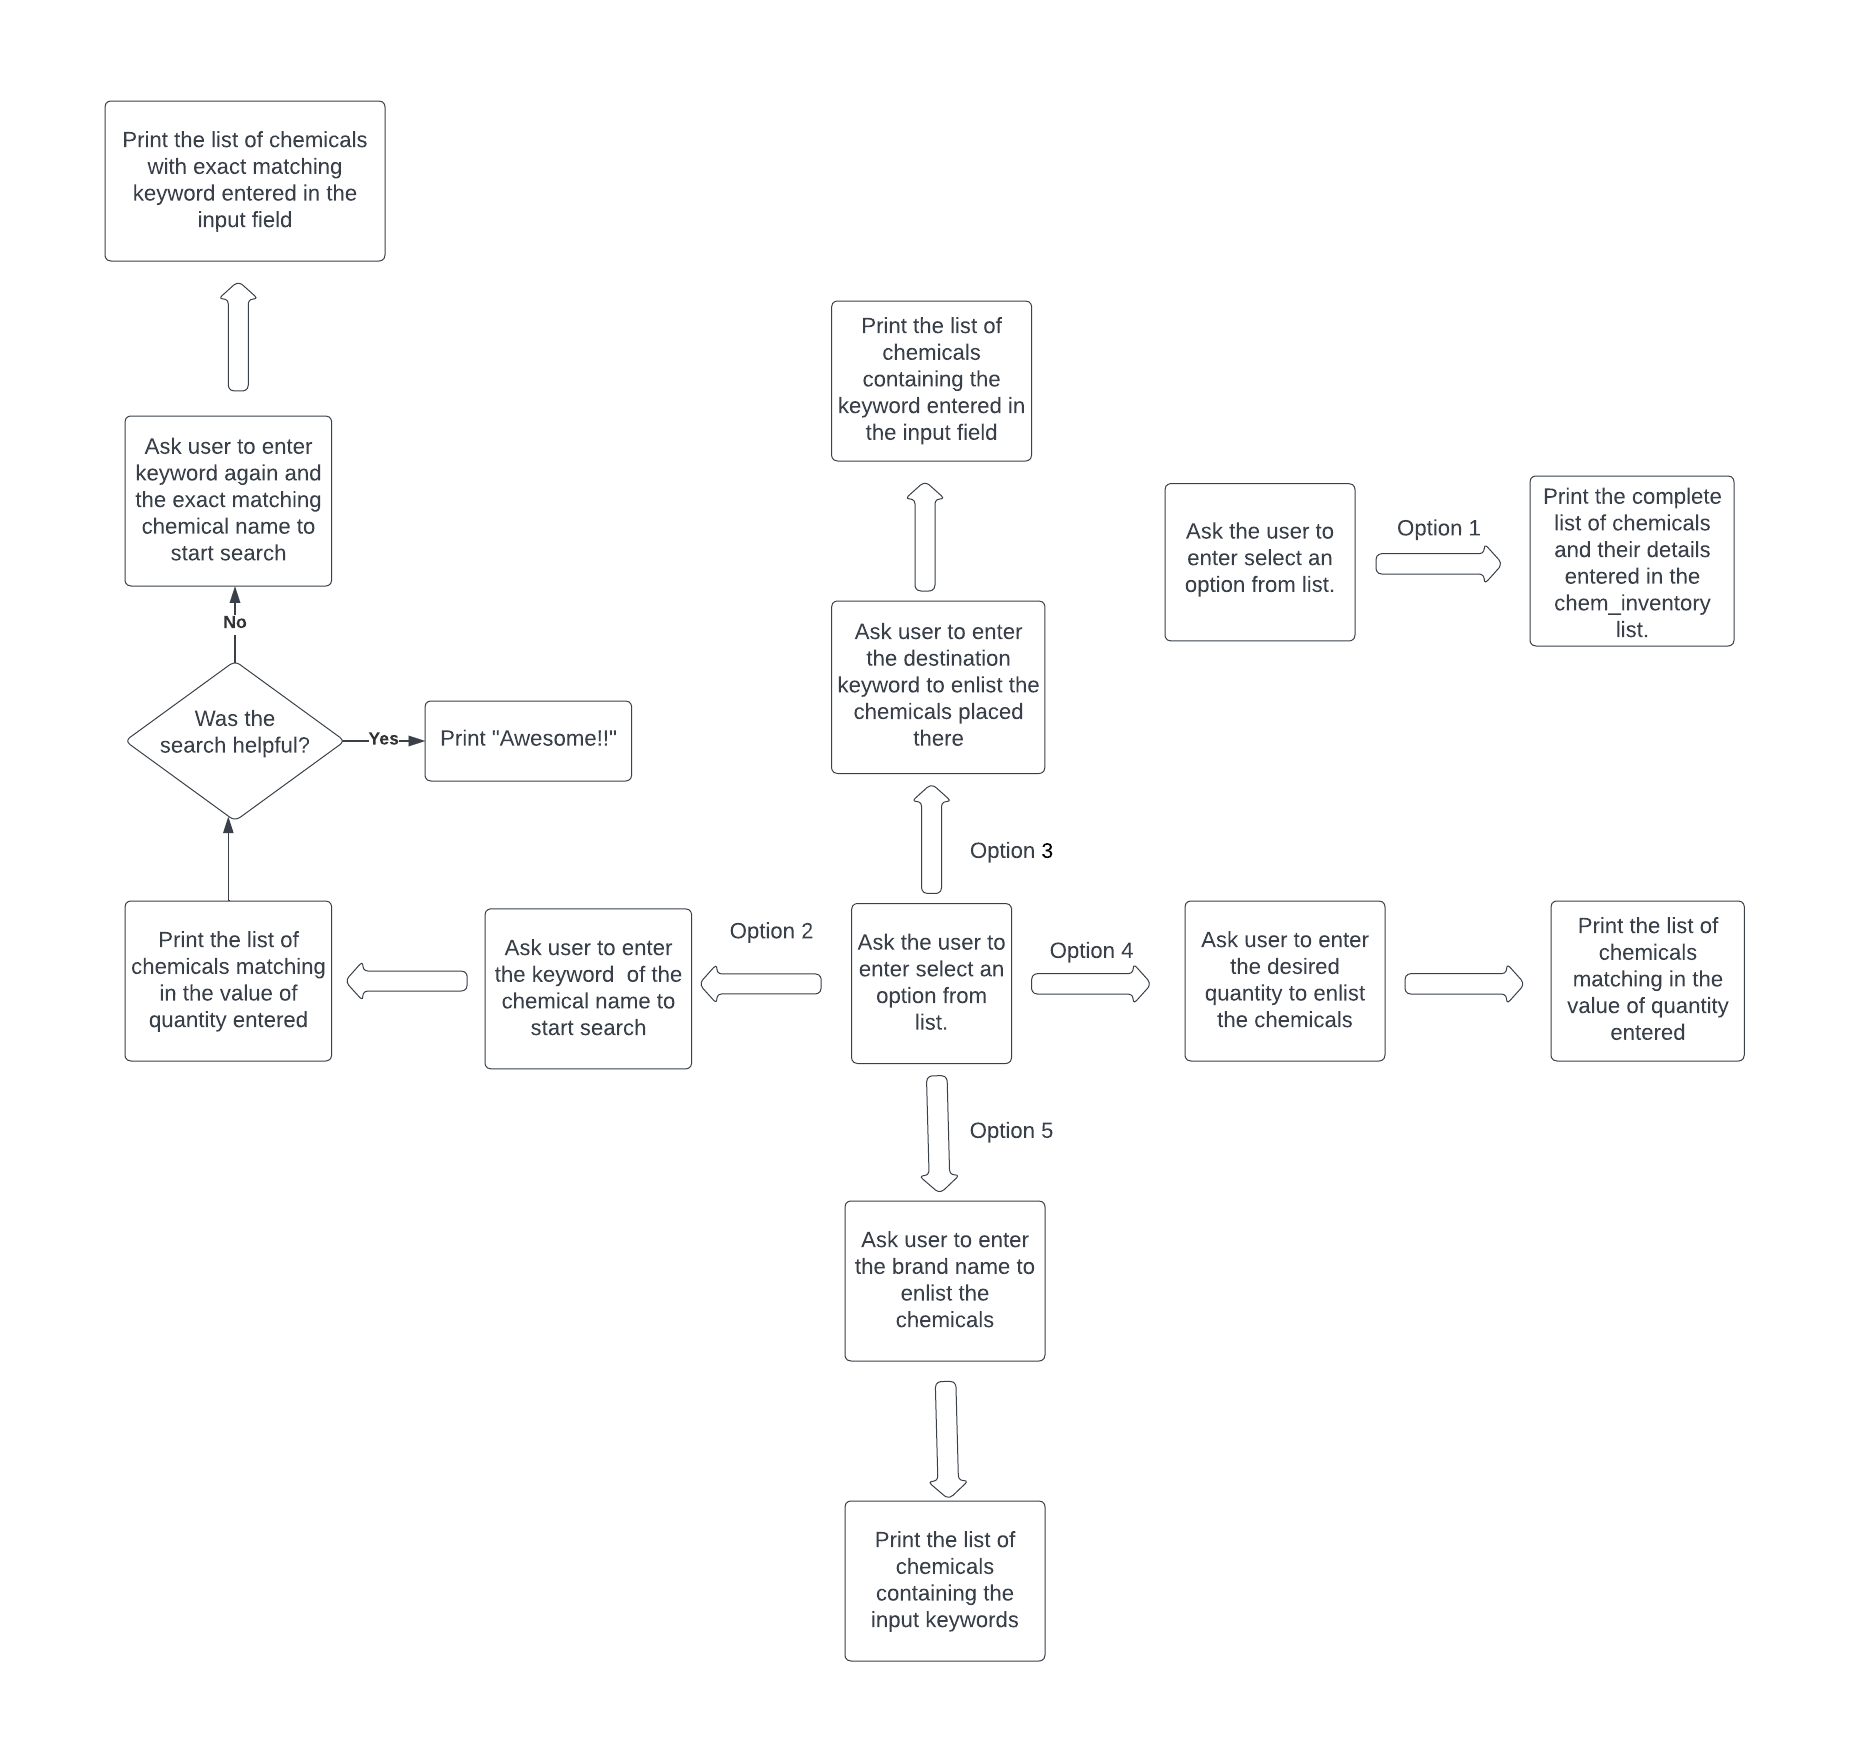 User selection flow